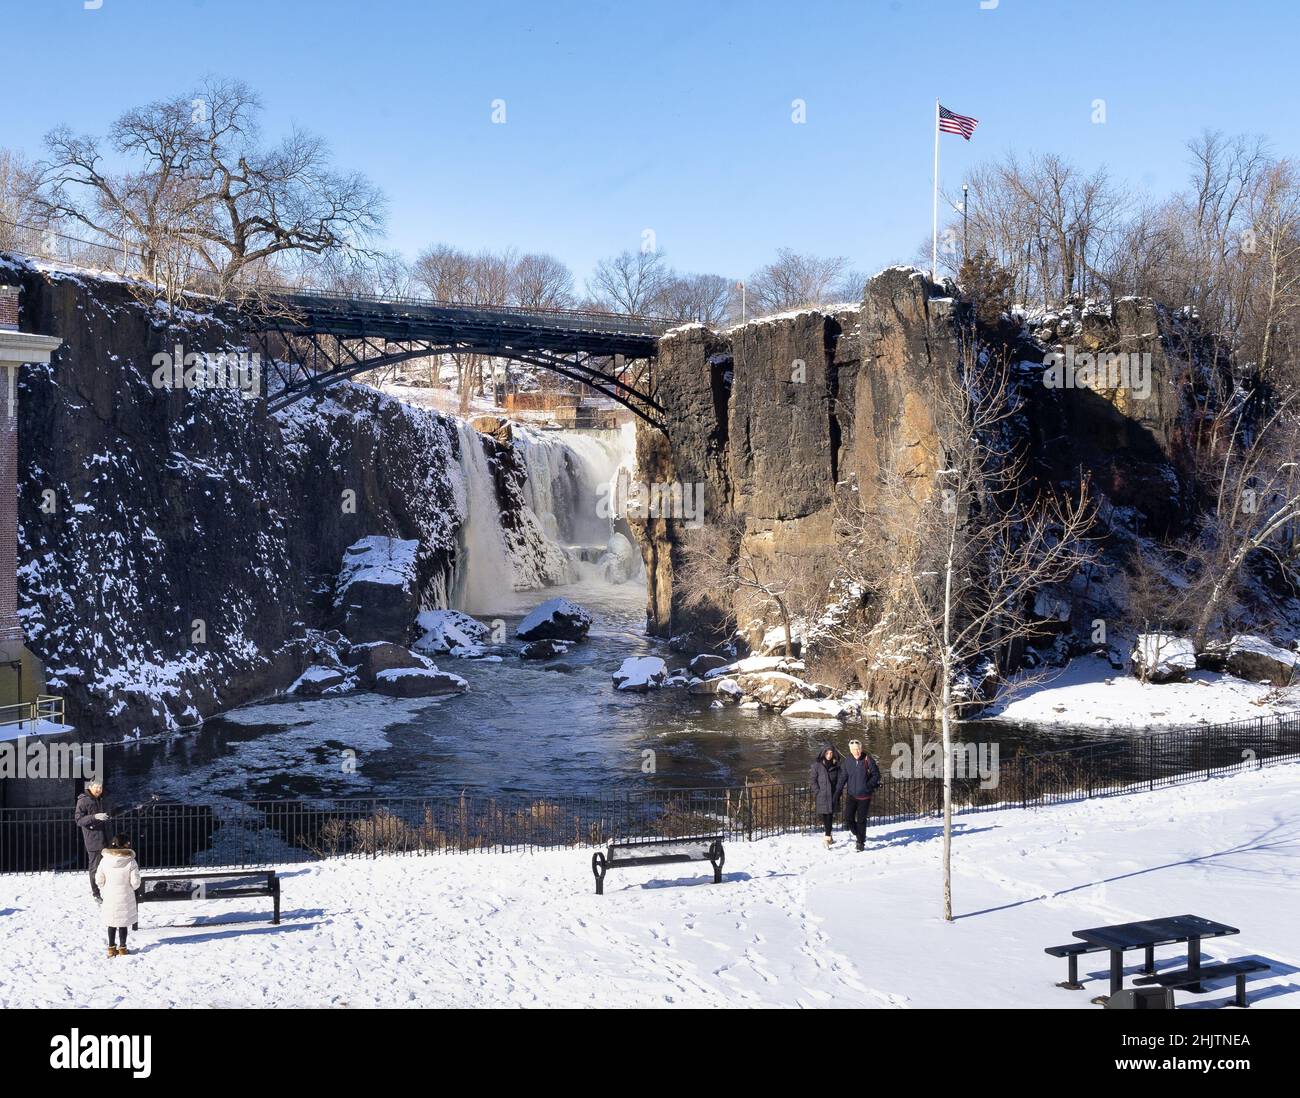 Paterson, NJ - USA - Jan 30, 2022 Wide horizontal view of tourists viewing the partially frozen falls at the historic Paterson Great Falls National Hi Stock Photo